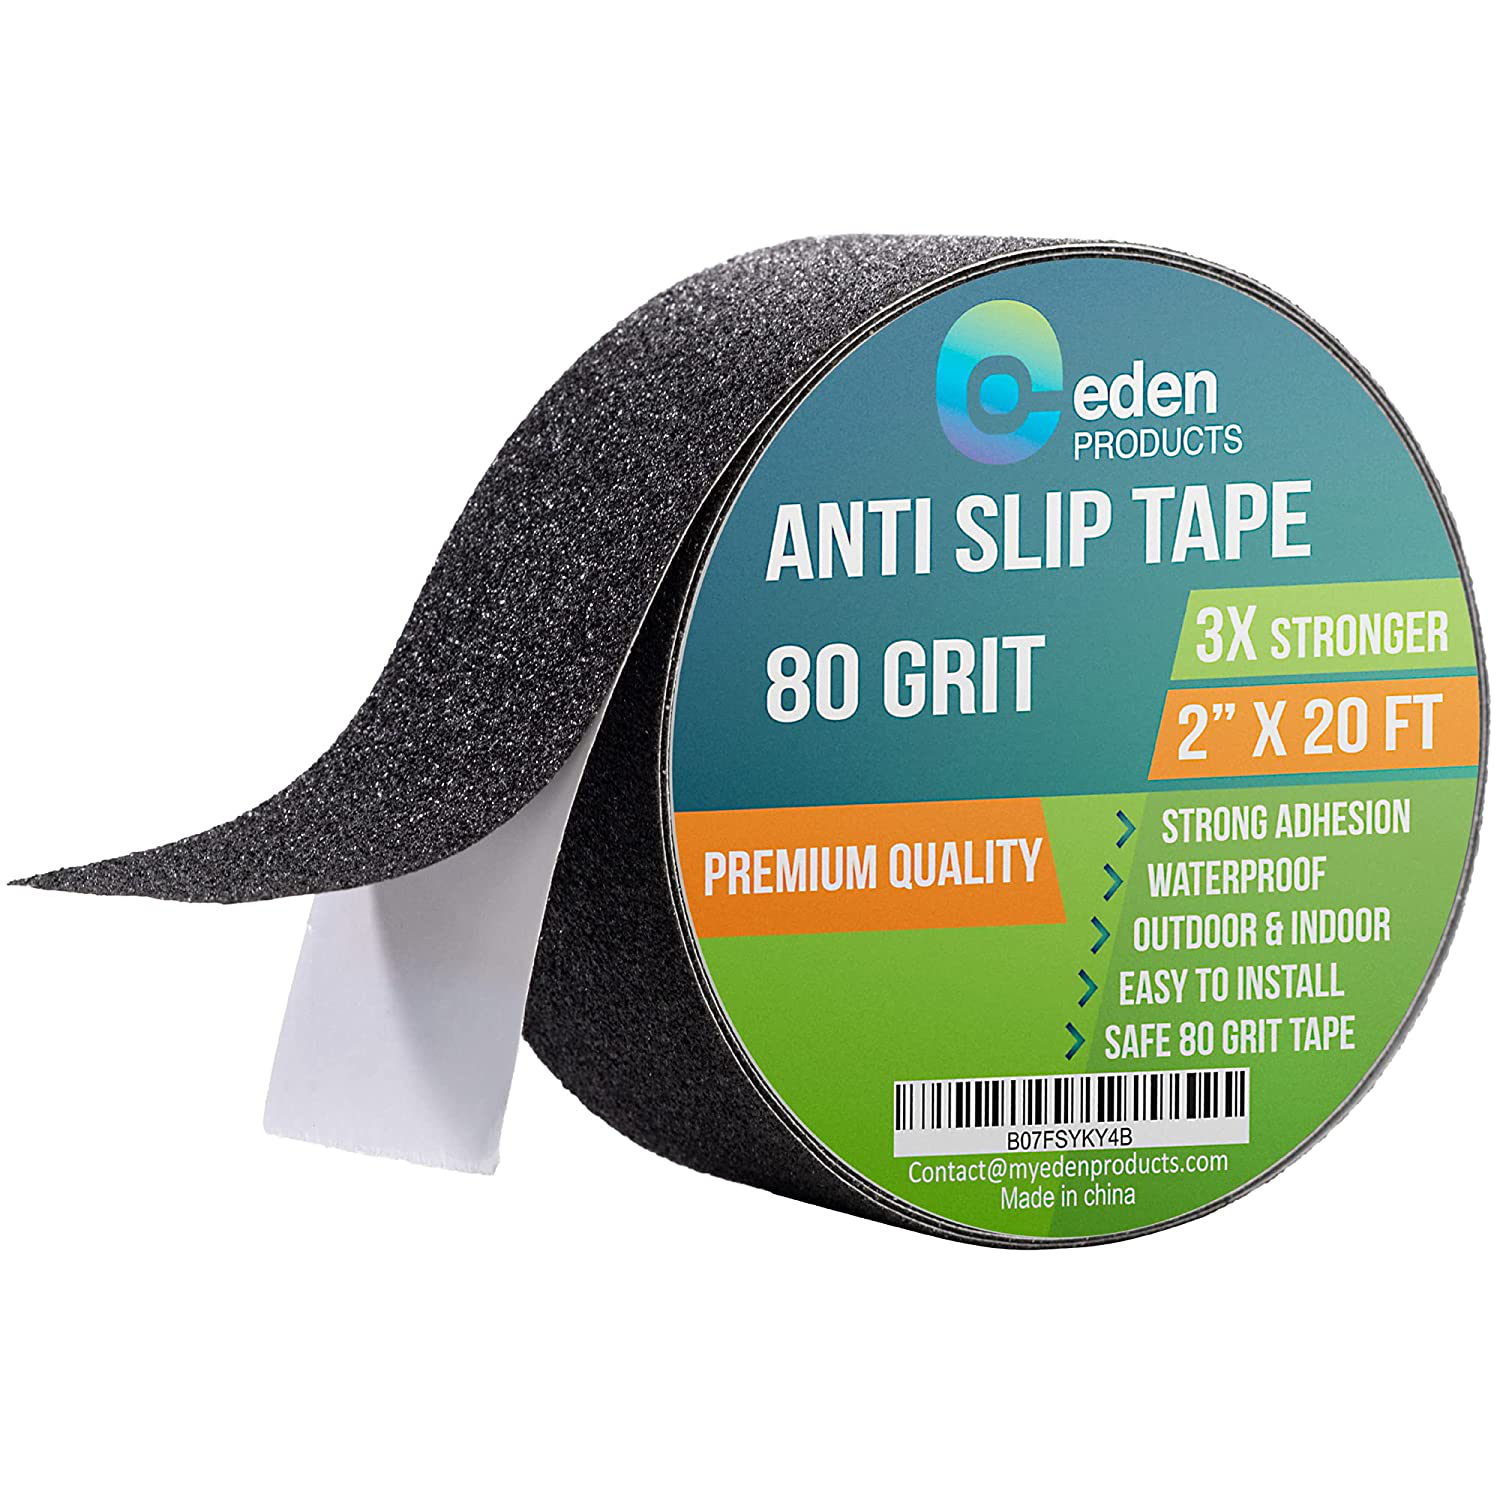 Grip Tape. Anti Slip. Great for Safety and Traction